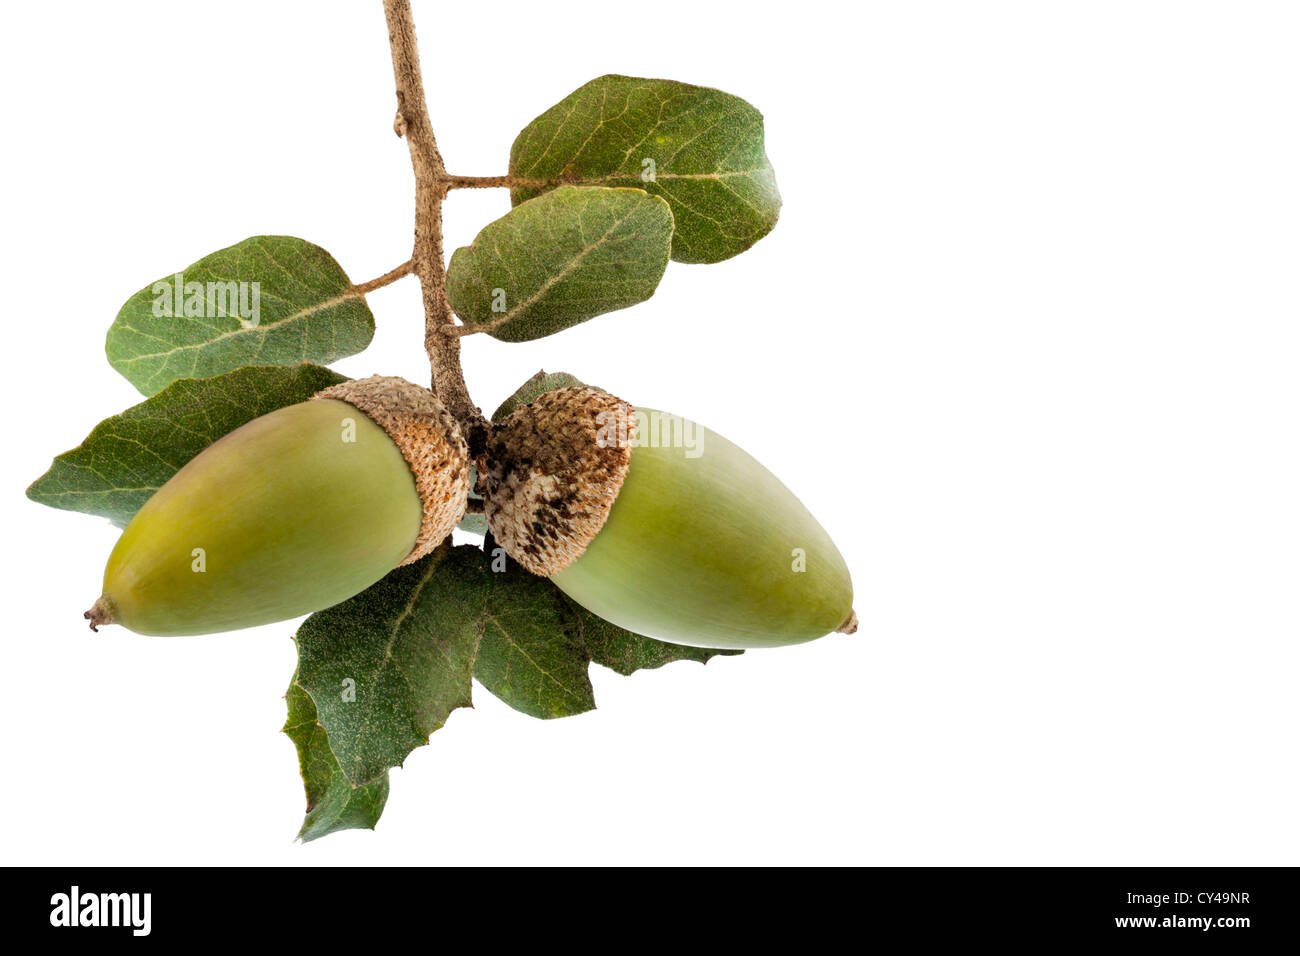 Holm oak branch with acorns Stock Photo